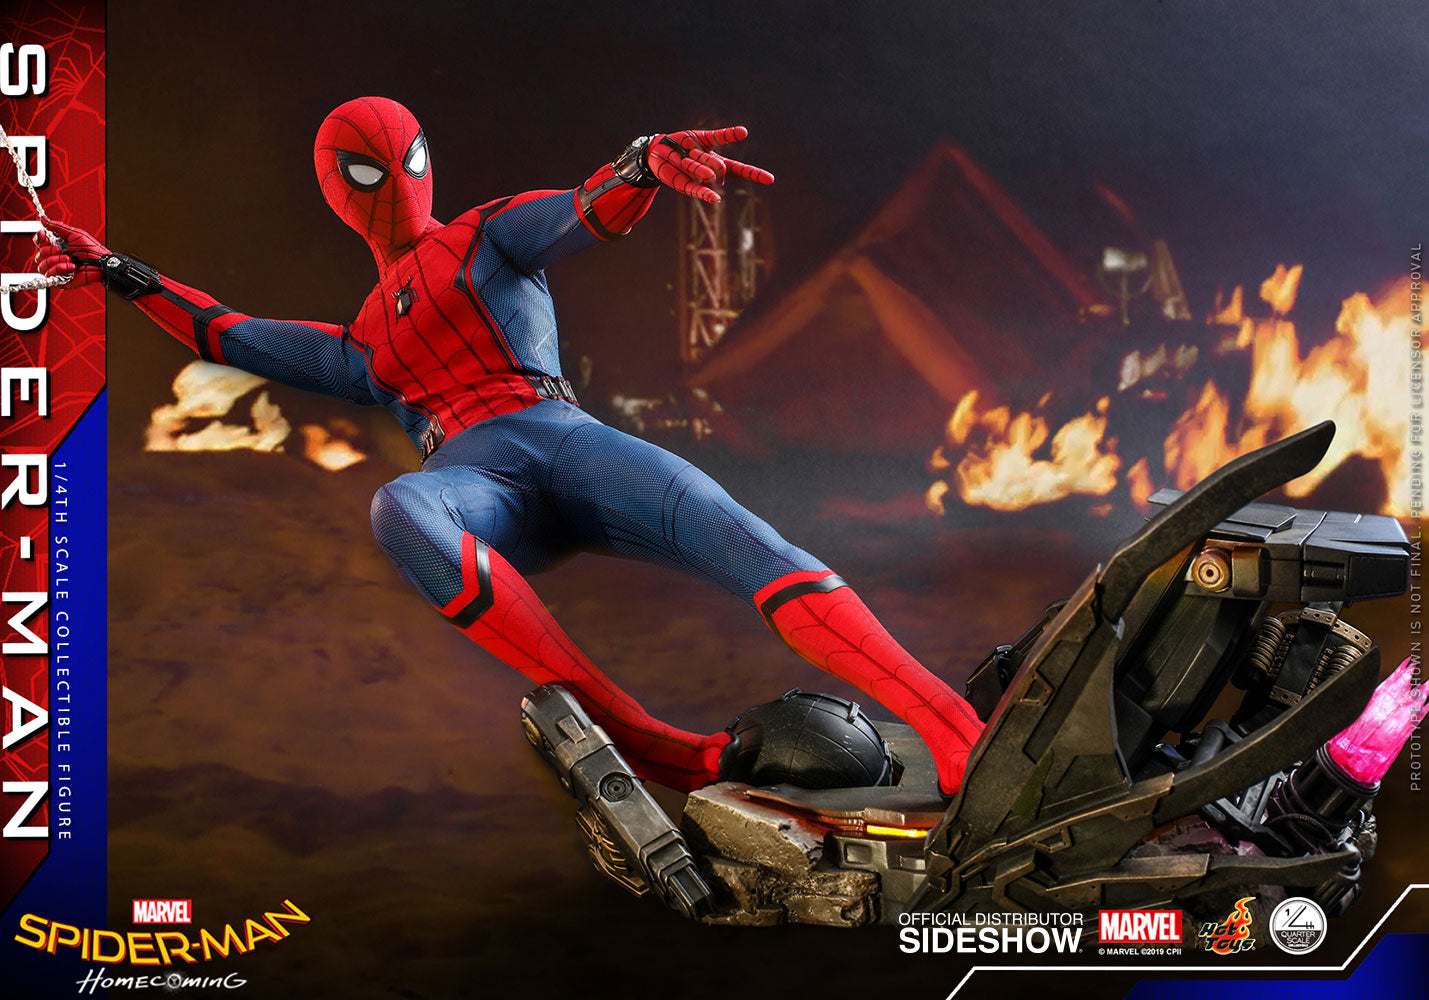 Hot Toys Spider-Man: Homecoming Marvel Quarter Scale Figure ...